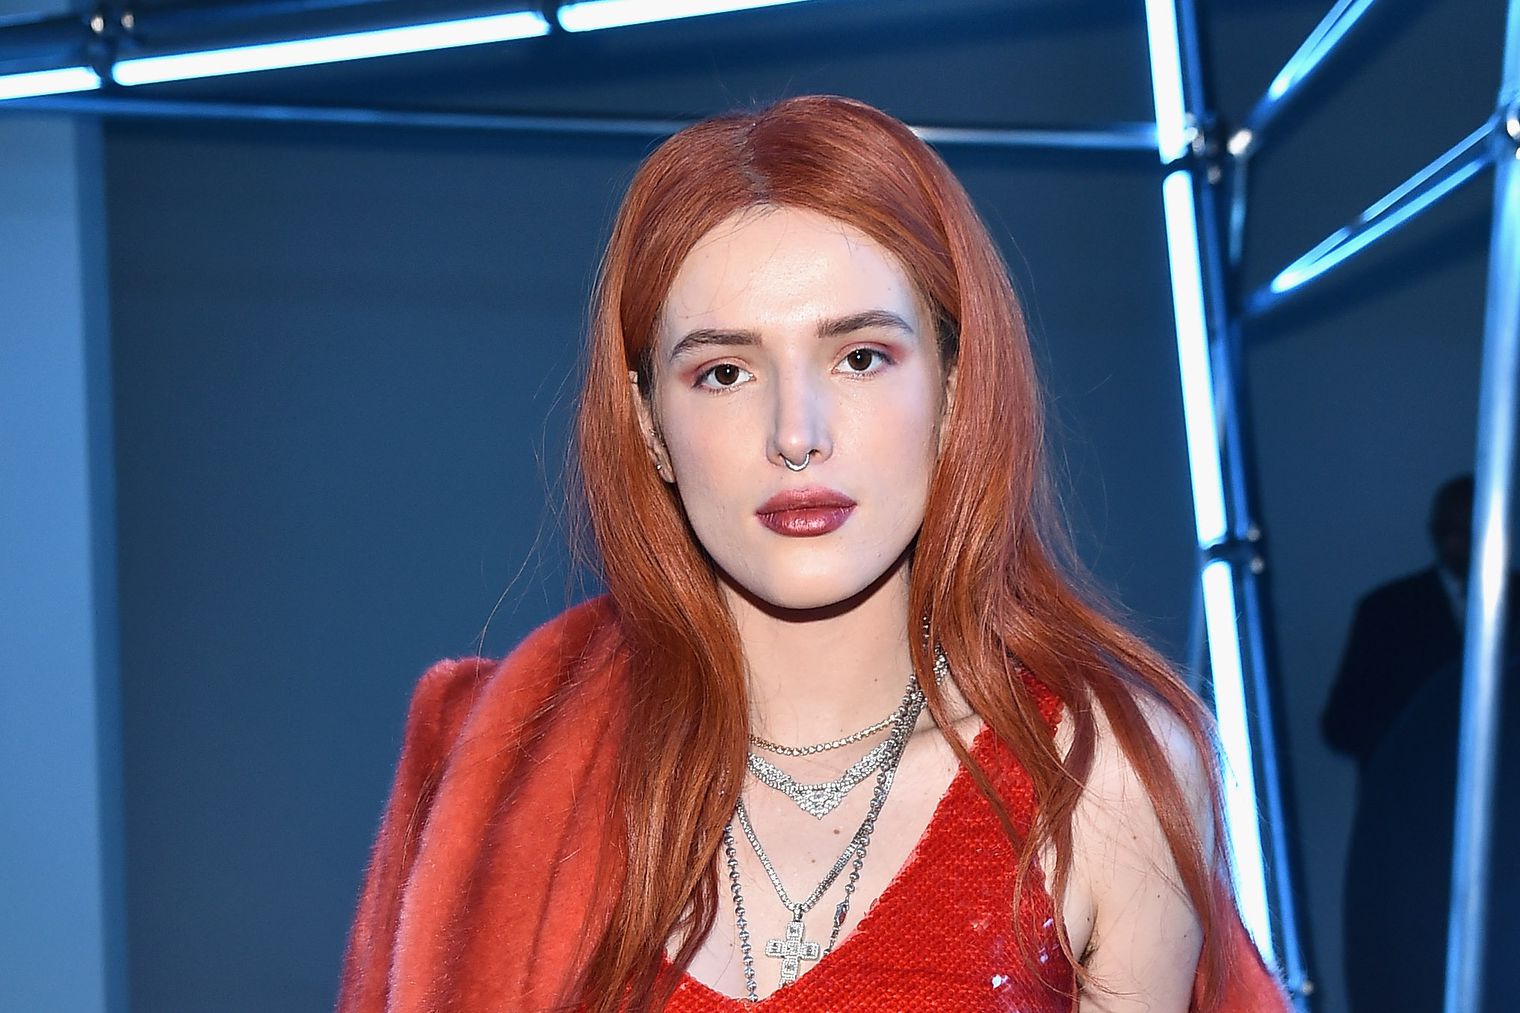 Edge On The Clock: Bella Thorne Shares Her Own Nude Photos 